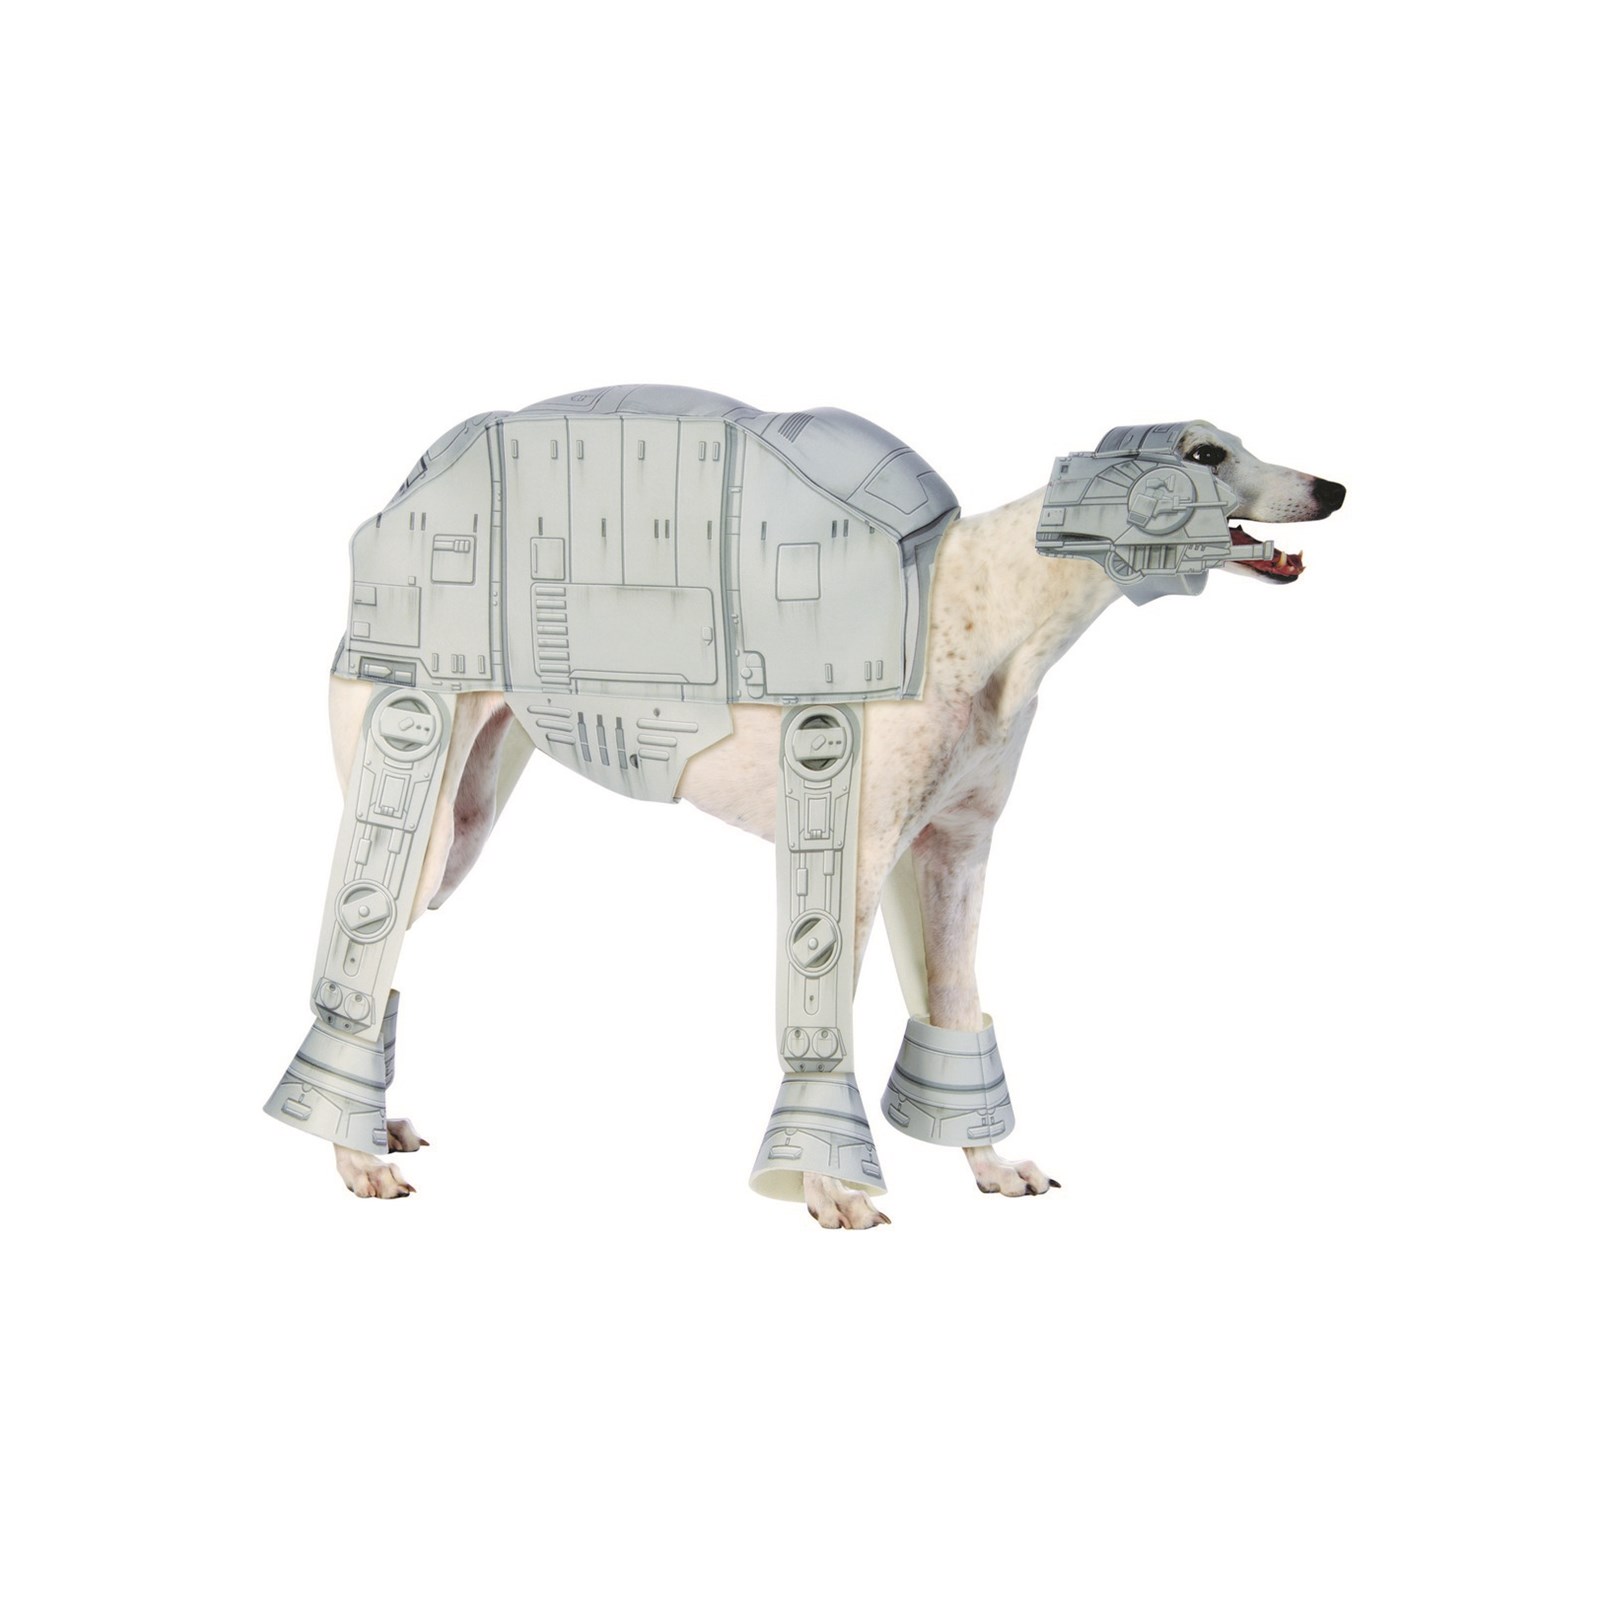 Star Wars - At-At Pet Costume Body & Headpiece - image 1 of 8